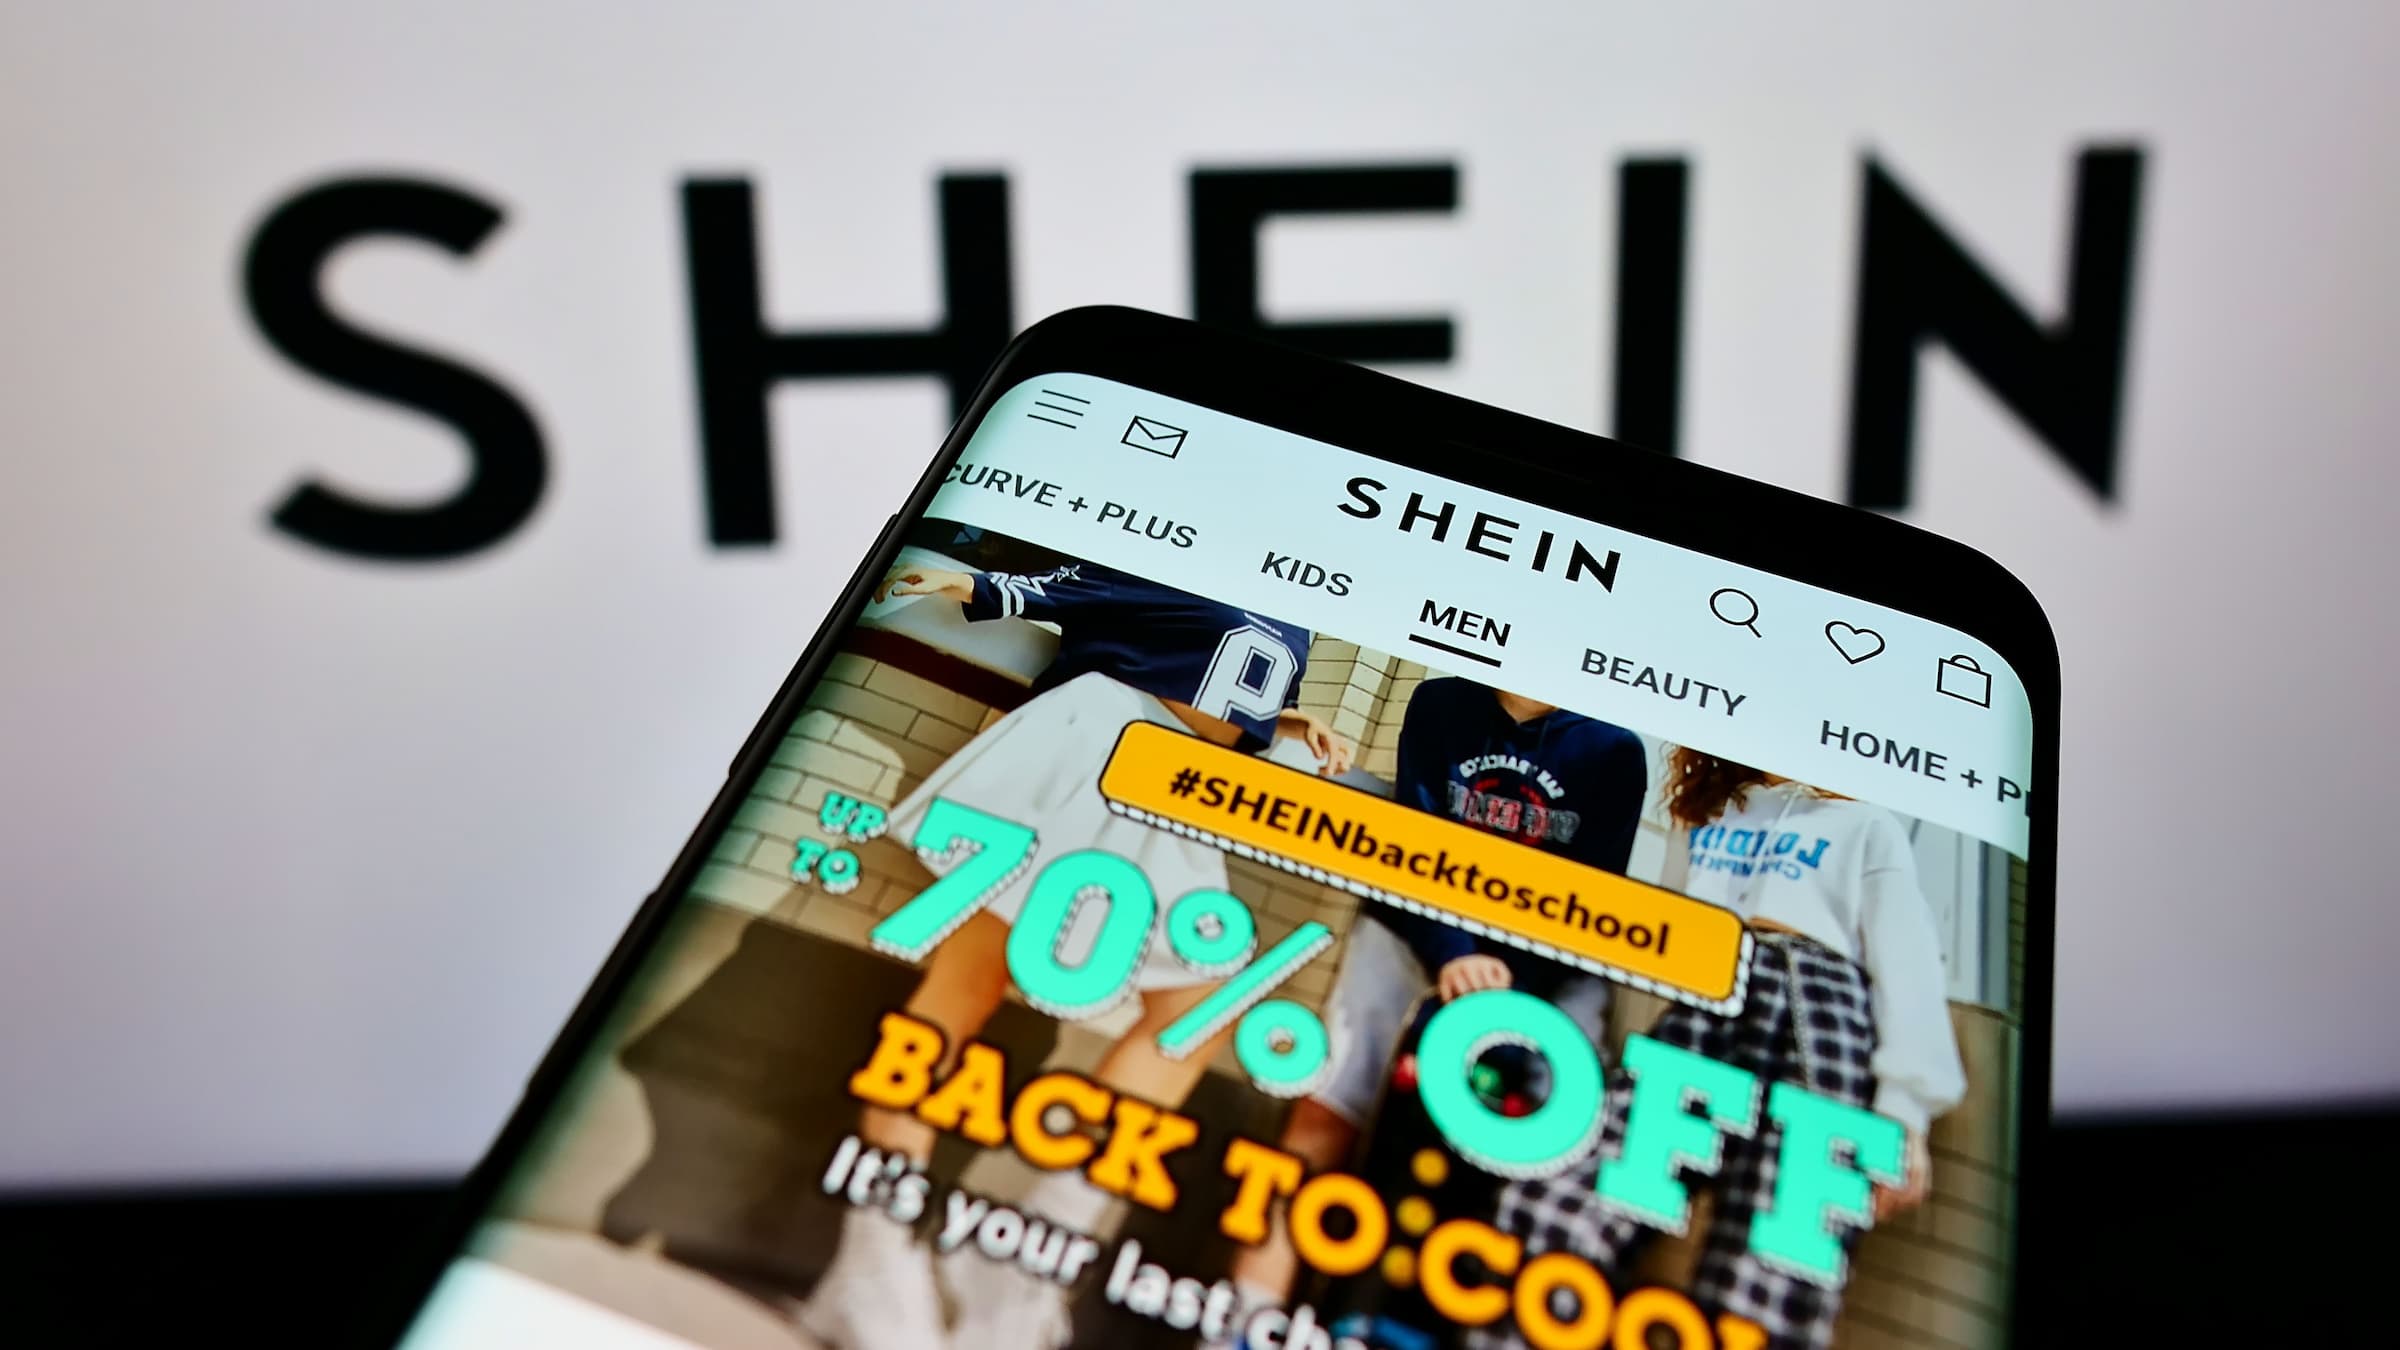 cellphone open to Shein mobile app in front of Shein logo in background